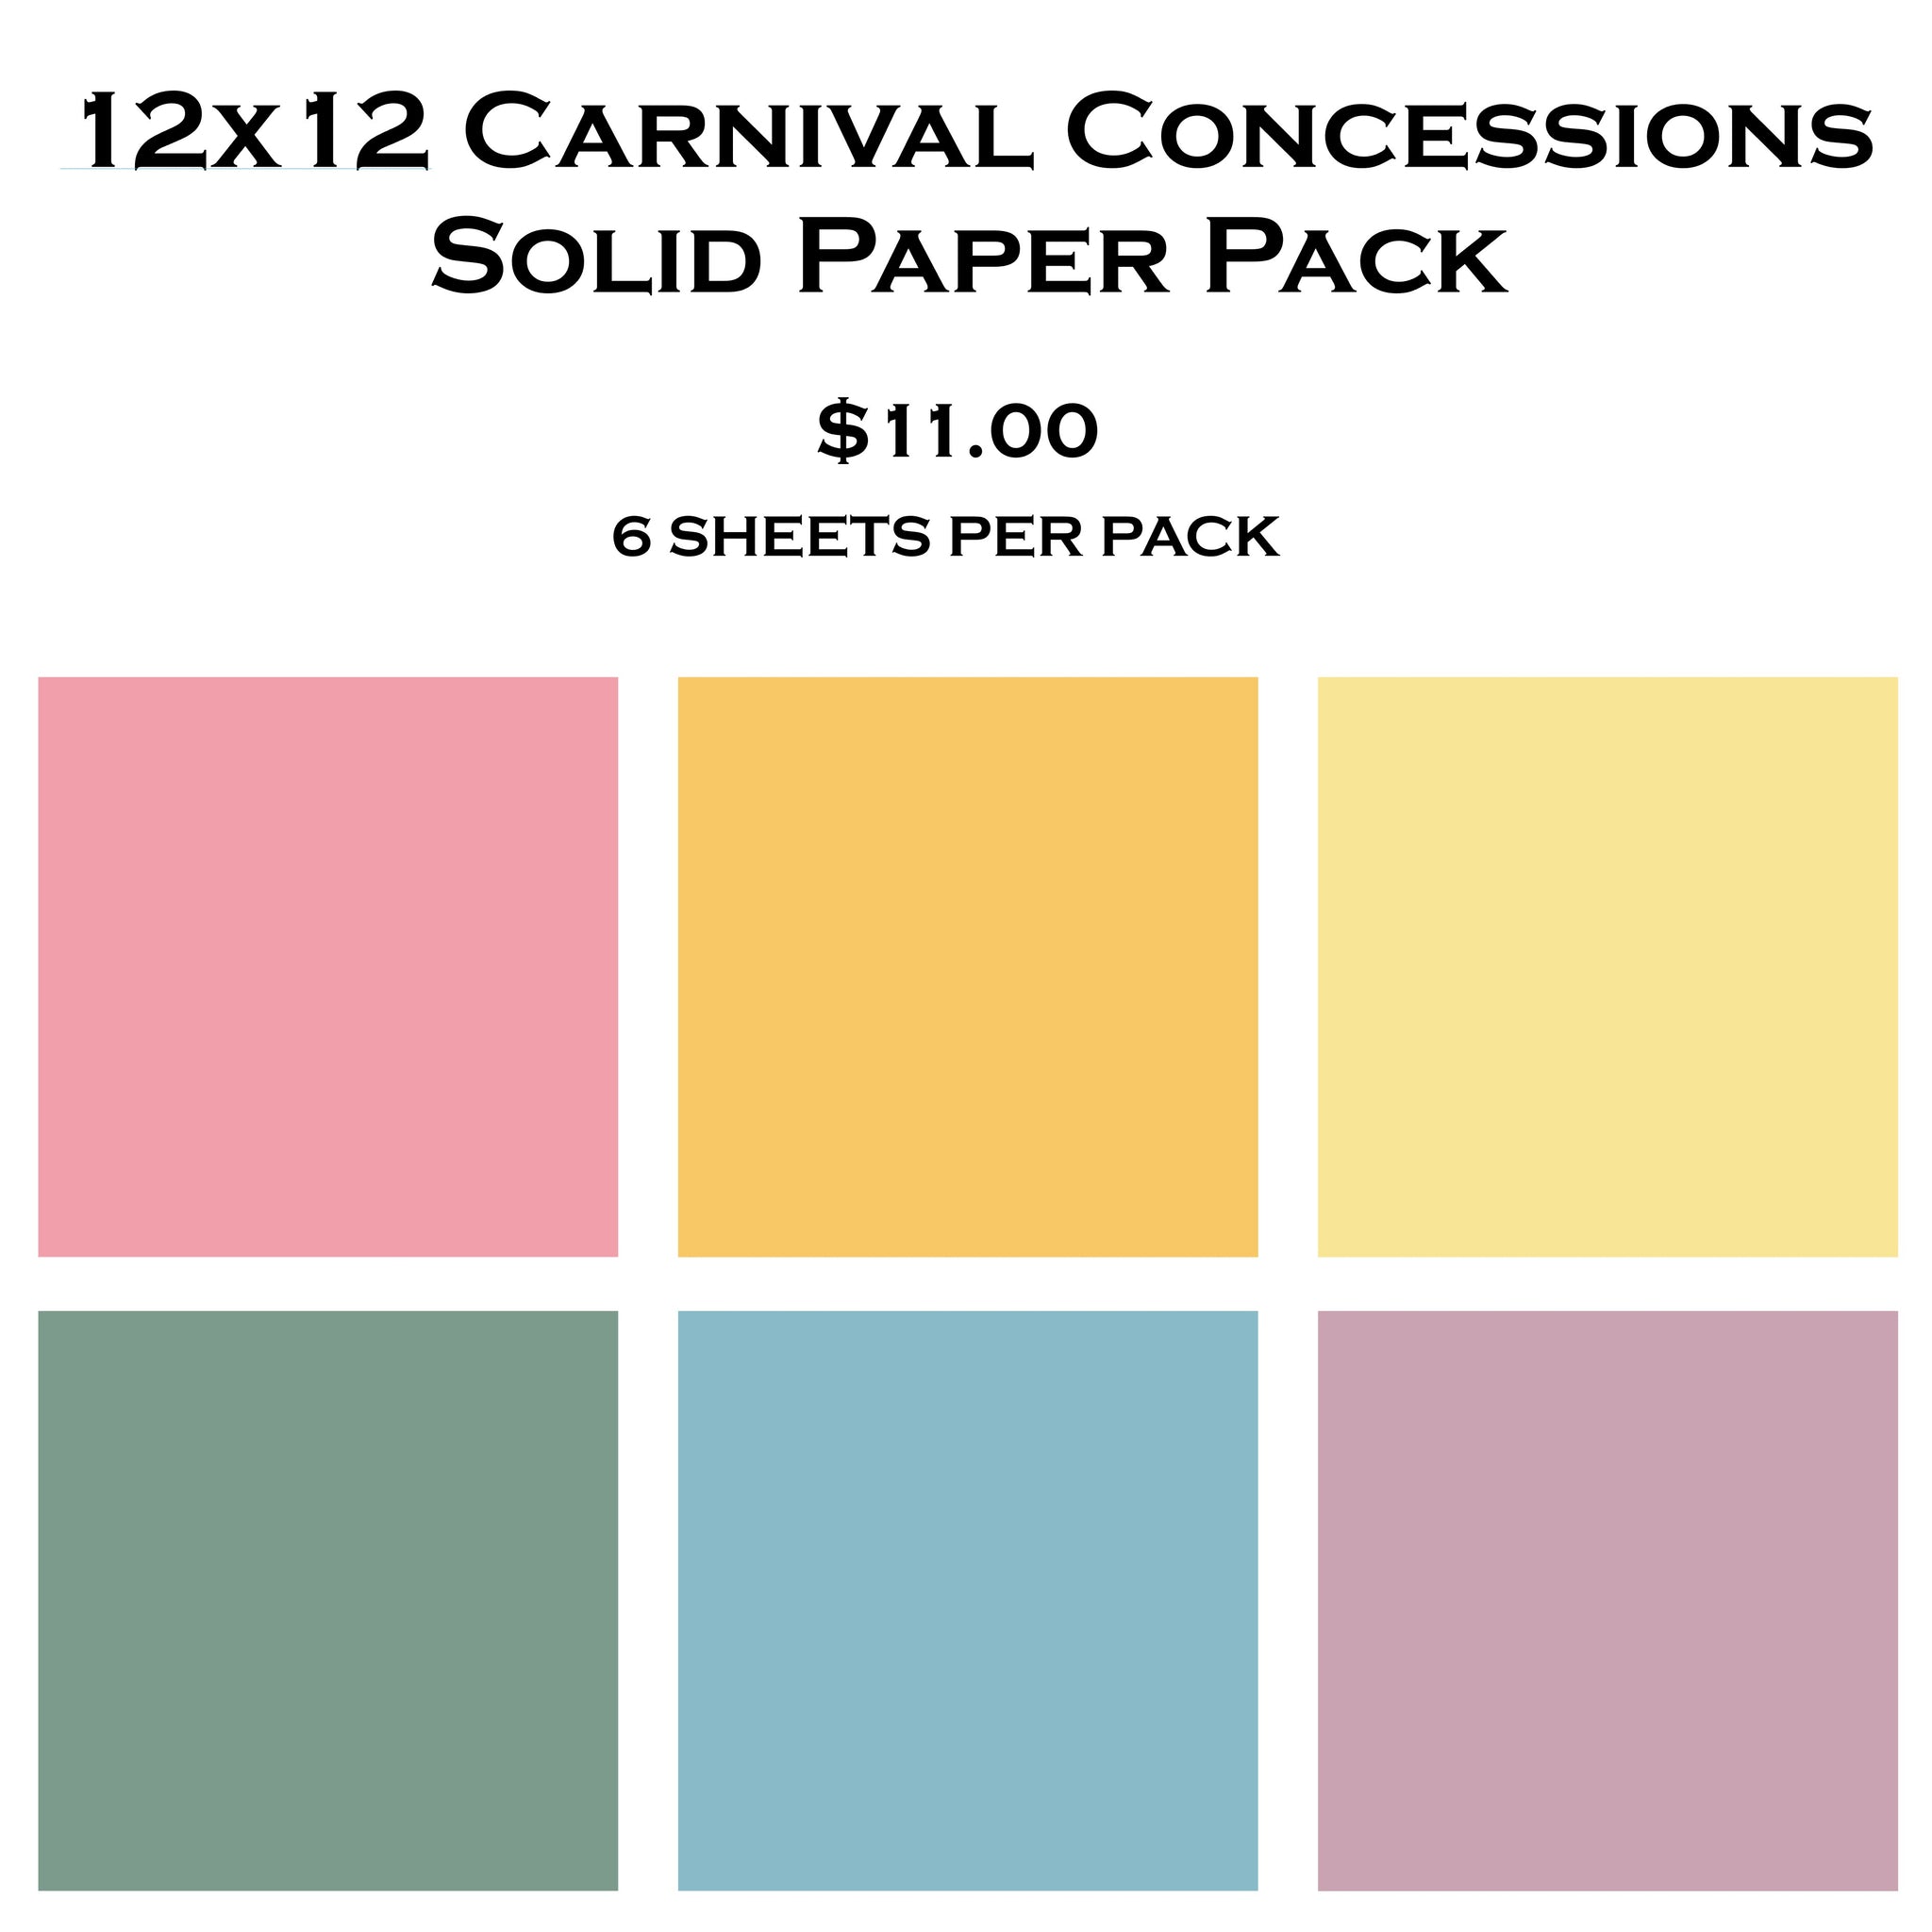 Carnival Concessions 12x12 Solid Paper Pack